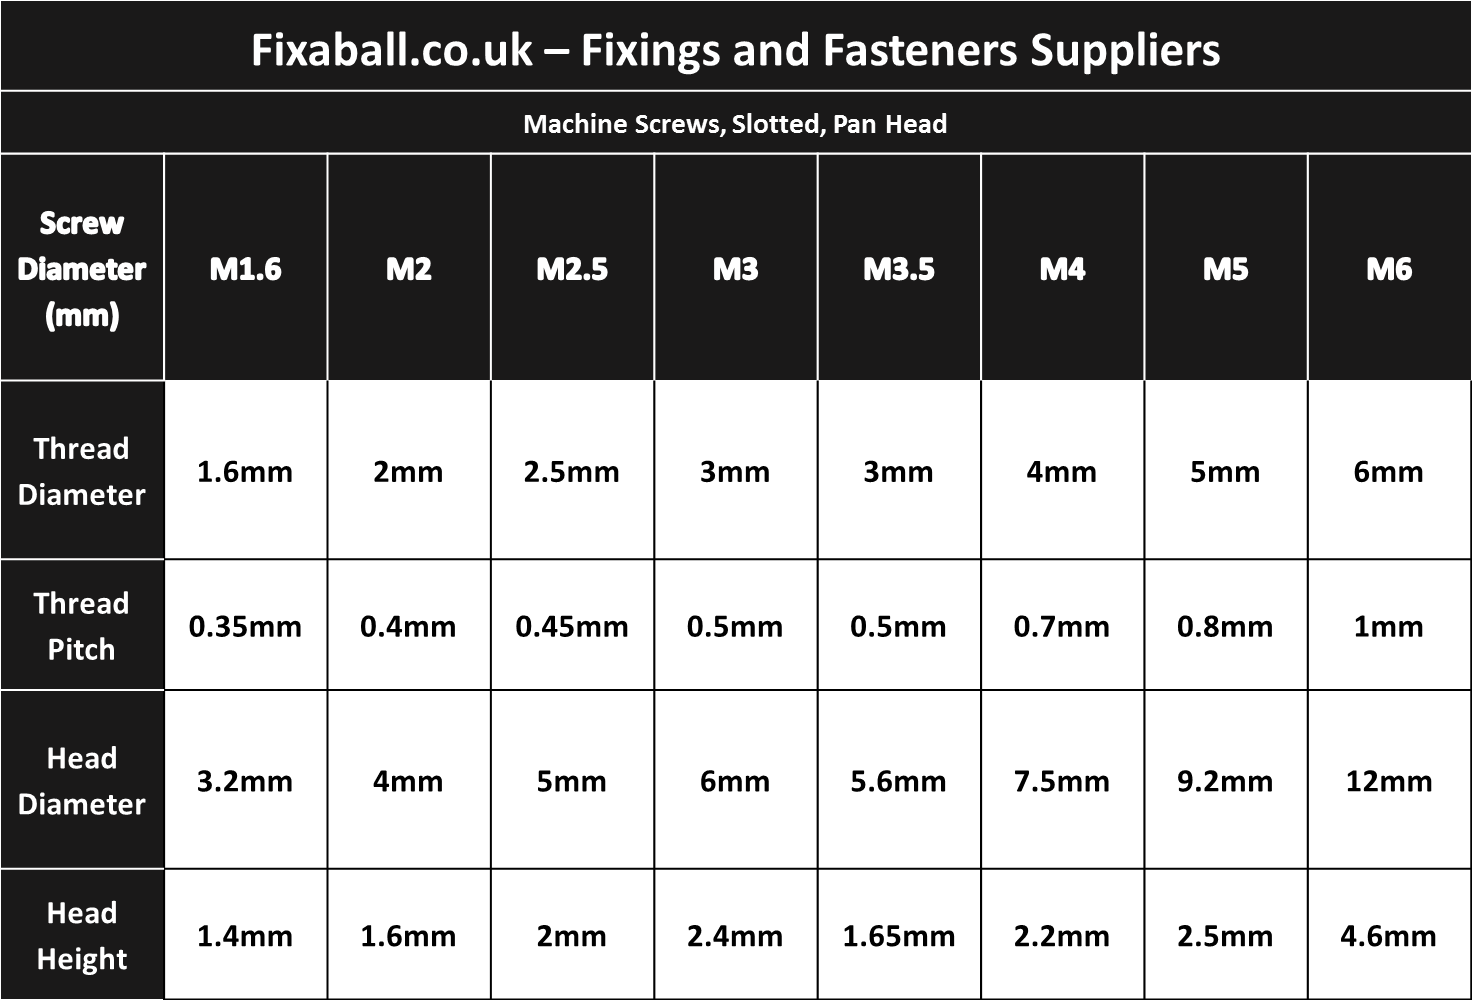 M3 Machine Screws Slotted Pan Head Brass DIN 85 - Fixaball Ltd. Fixings and Fasteners UK